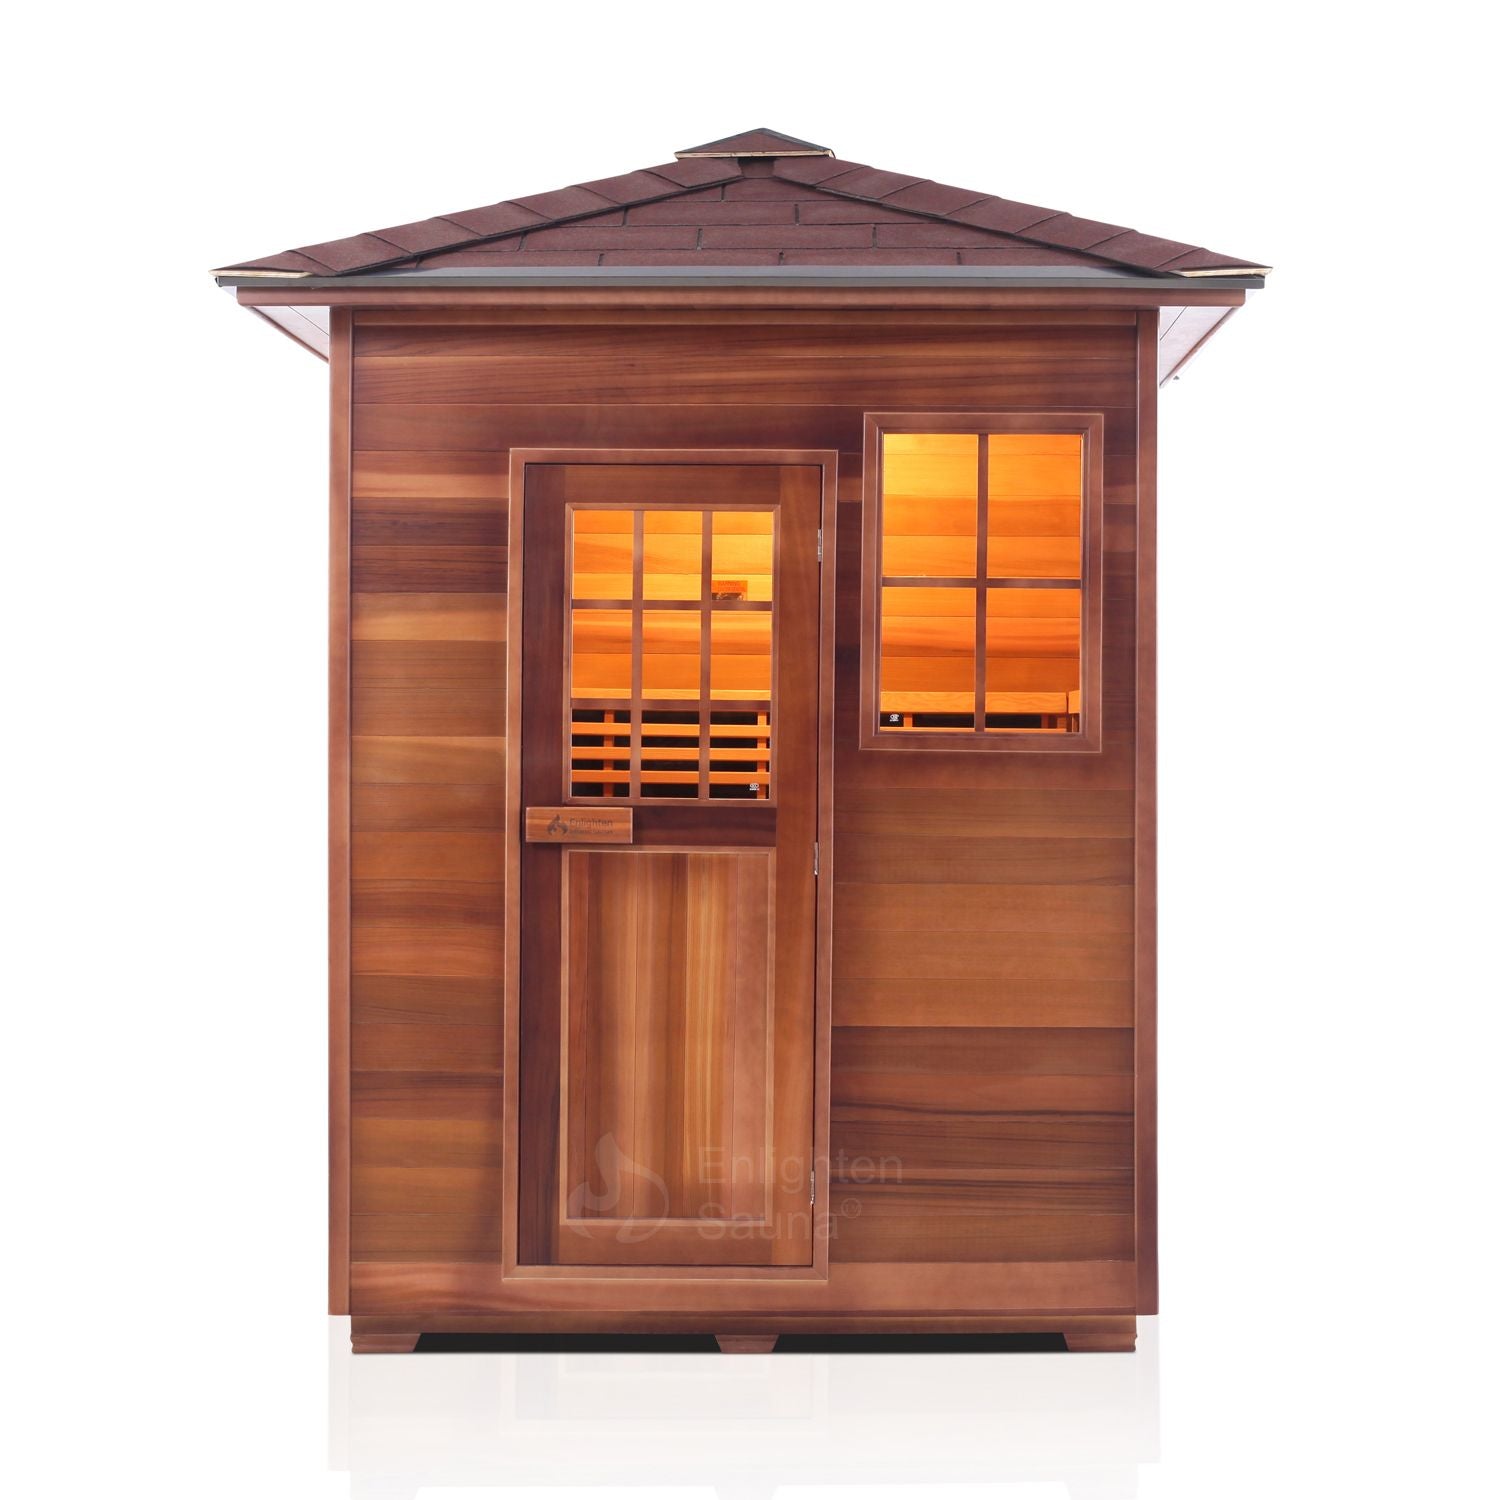 Enlighten Sauna InfraNature Original Infrared Outdoor West Canadian red cedar inside and out 3 person sauna with peak roof front view